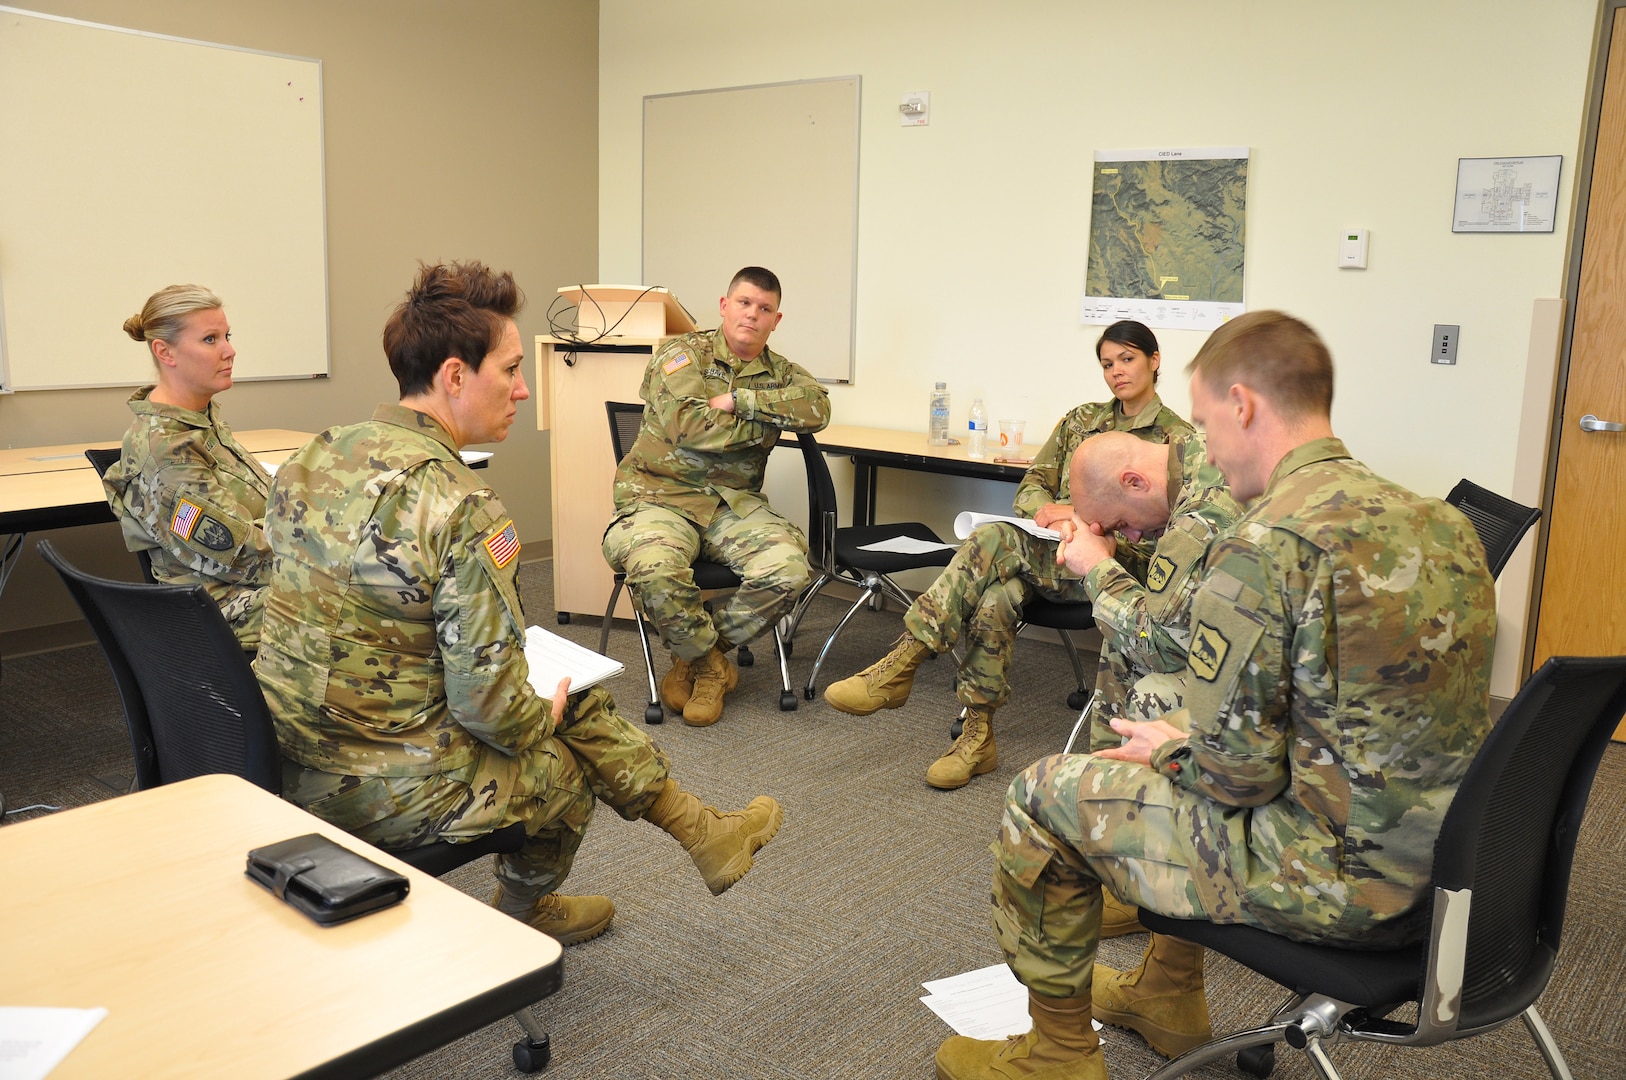 Soldiers from the South Dakota Army National Guard go through a role playing exercise during the Traumatic Event Management course at Camp Rapid in Rapid City, S.D., Oct. 10, 2019. The TEM course helped to develop the organization's response and support services throughout the state.